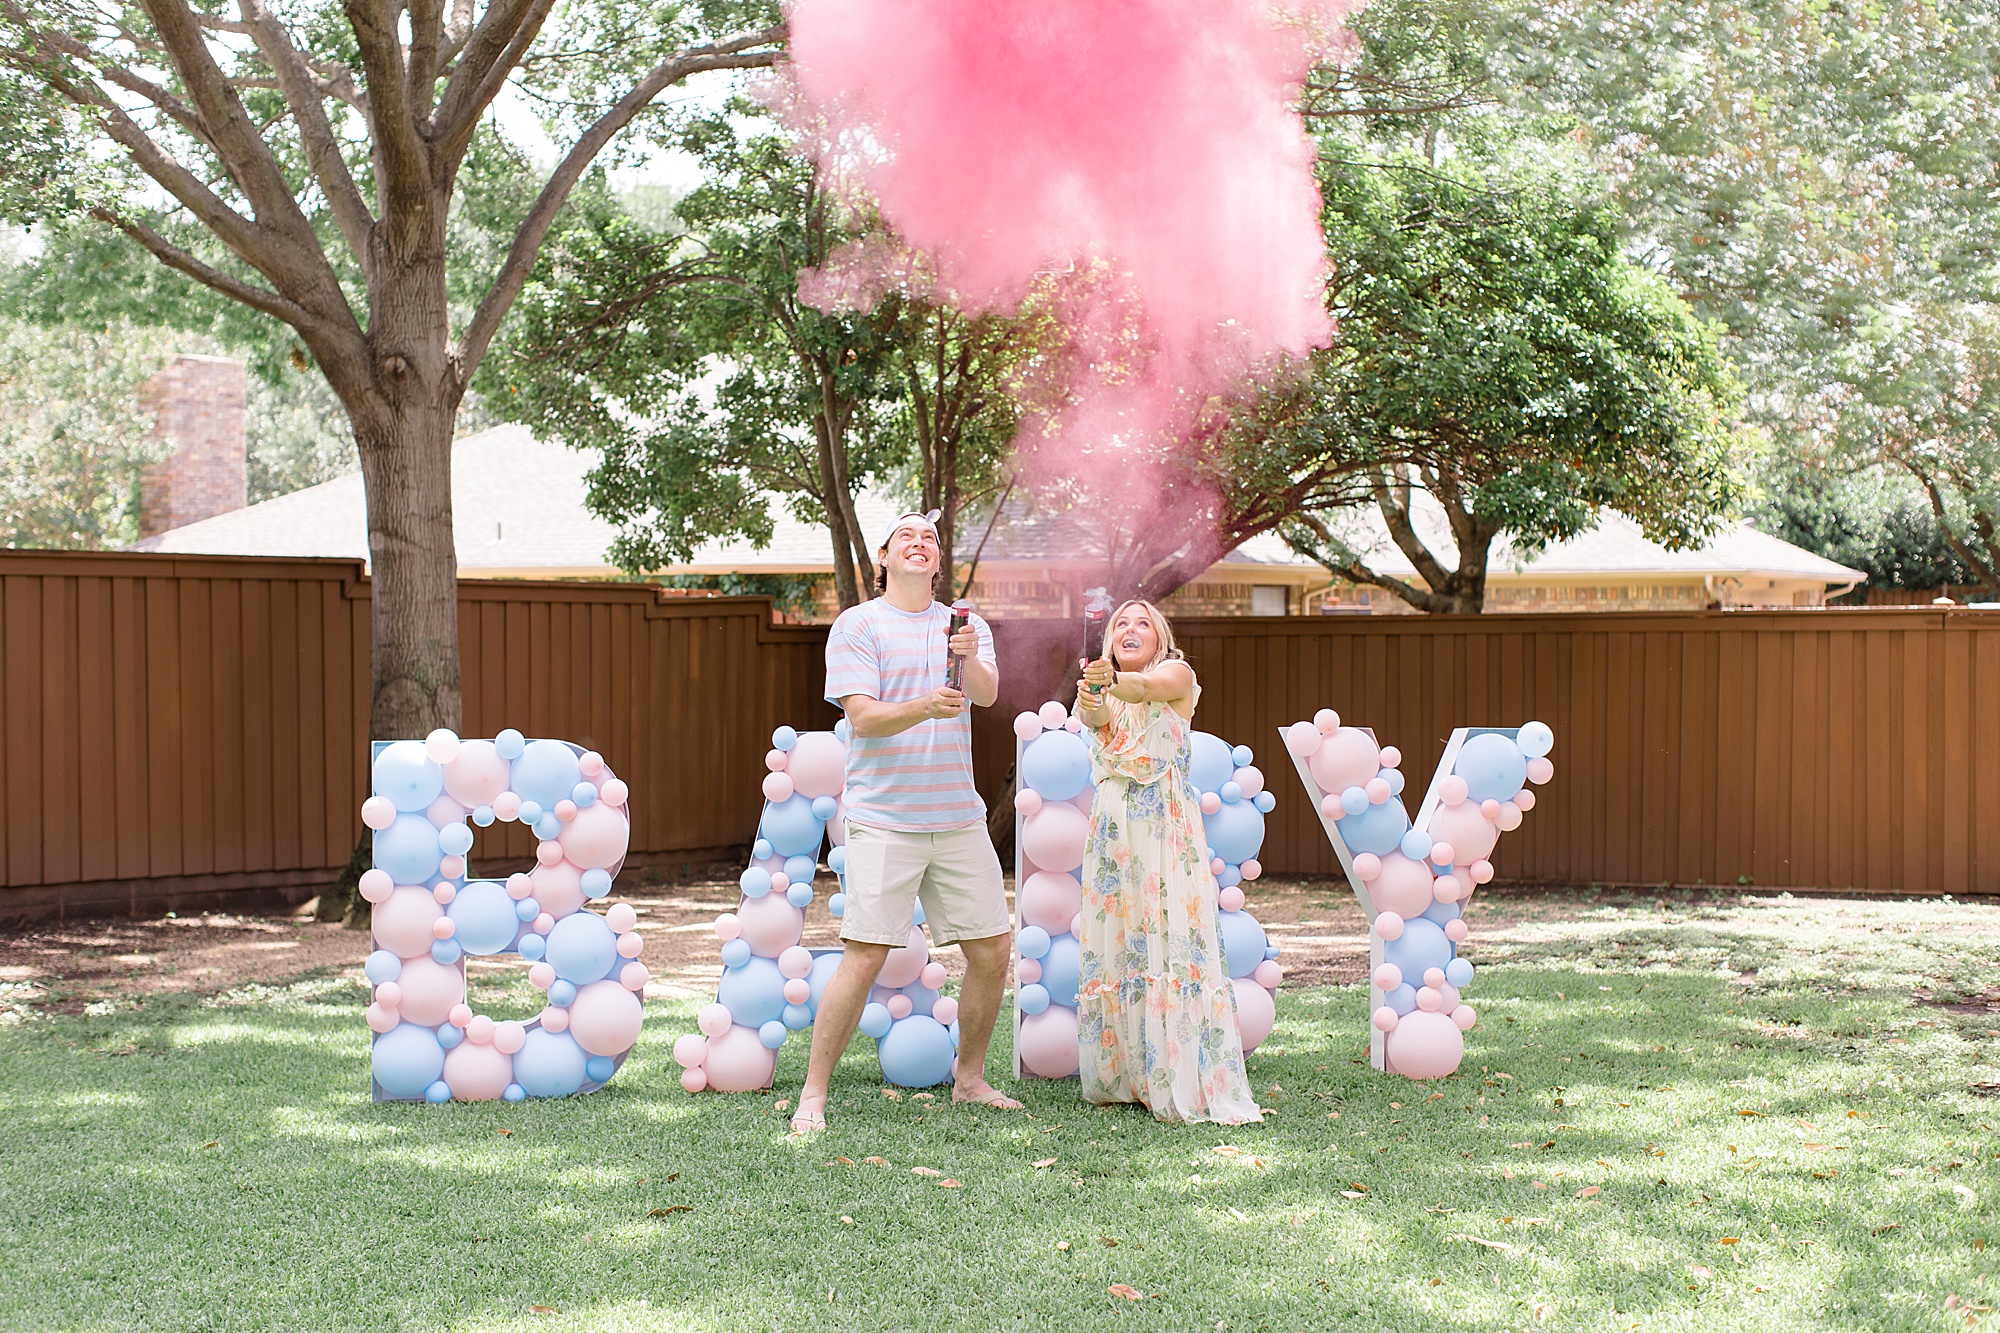 expecting parents pop confetti cannon during gender reveal party